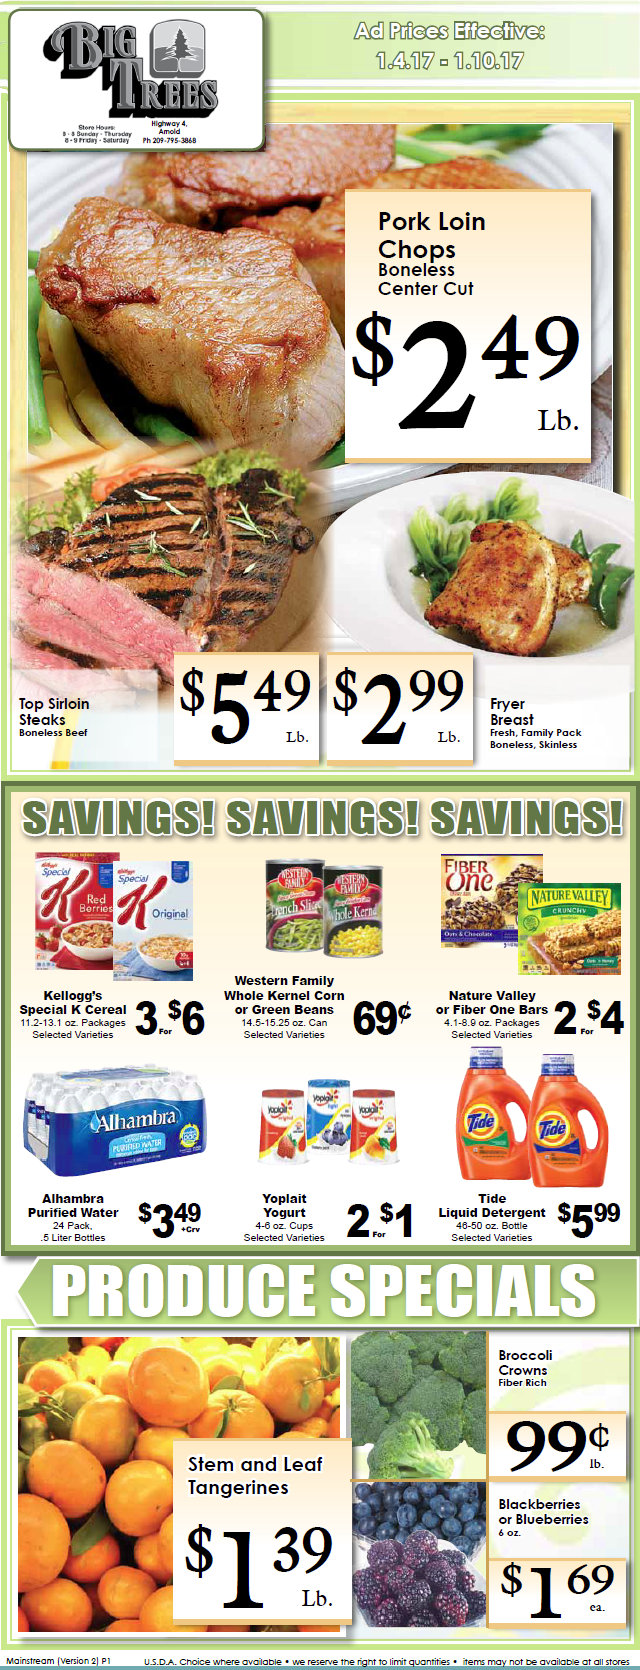 Big Trees Market Weekly Ad & Specials Through January 10, 2017